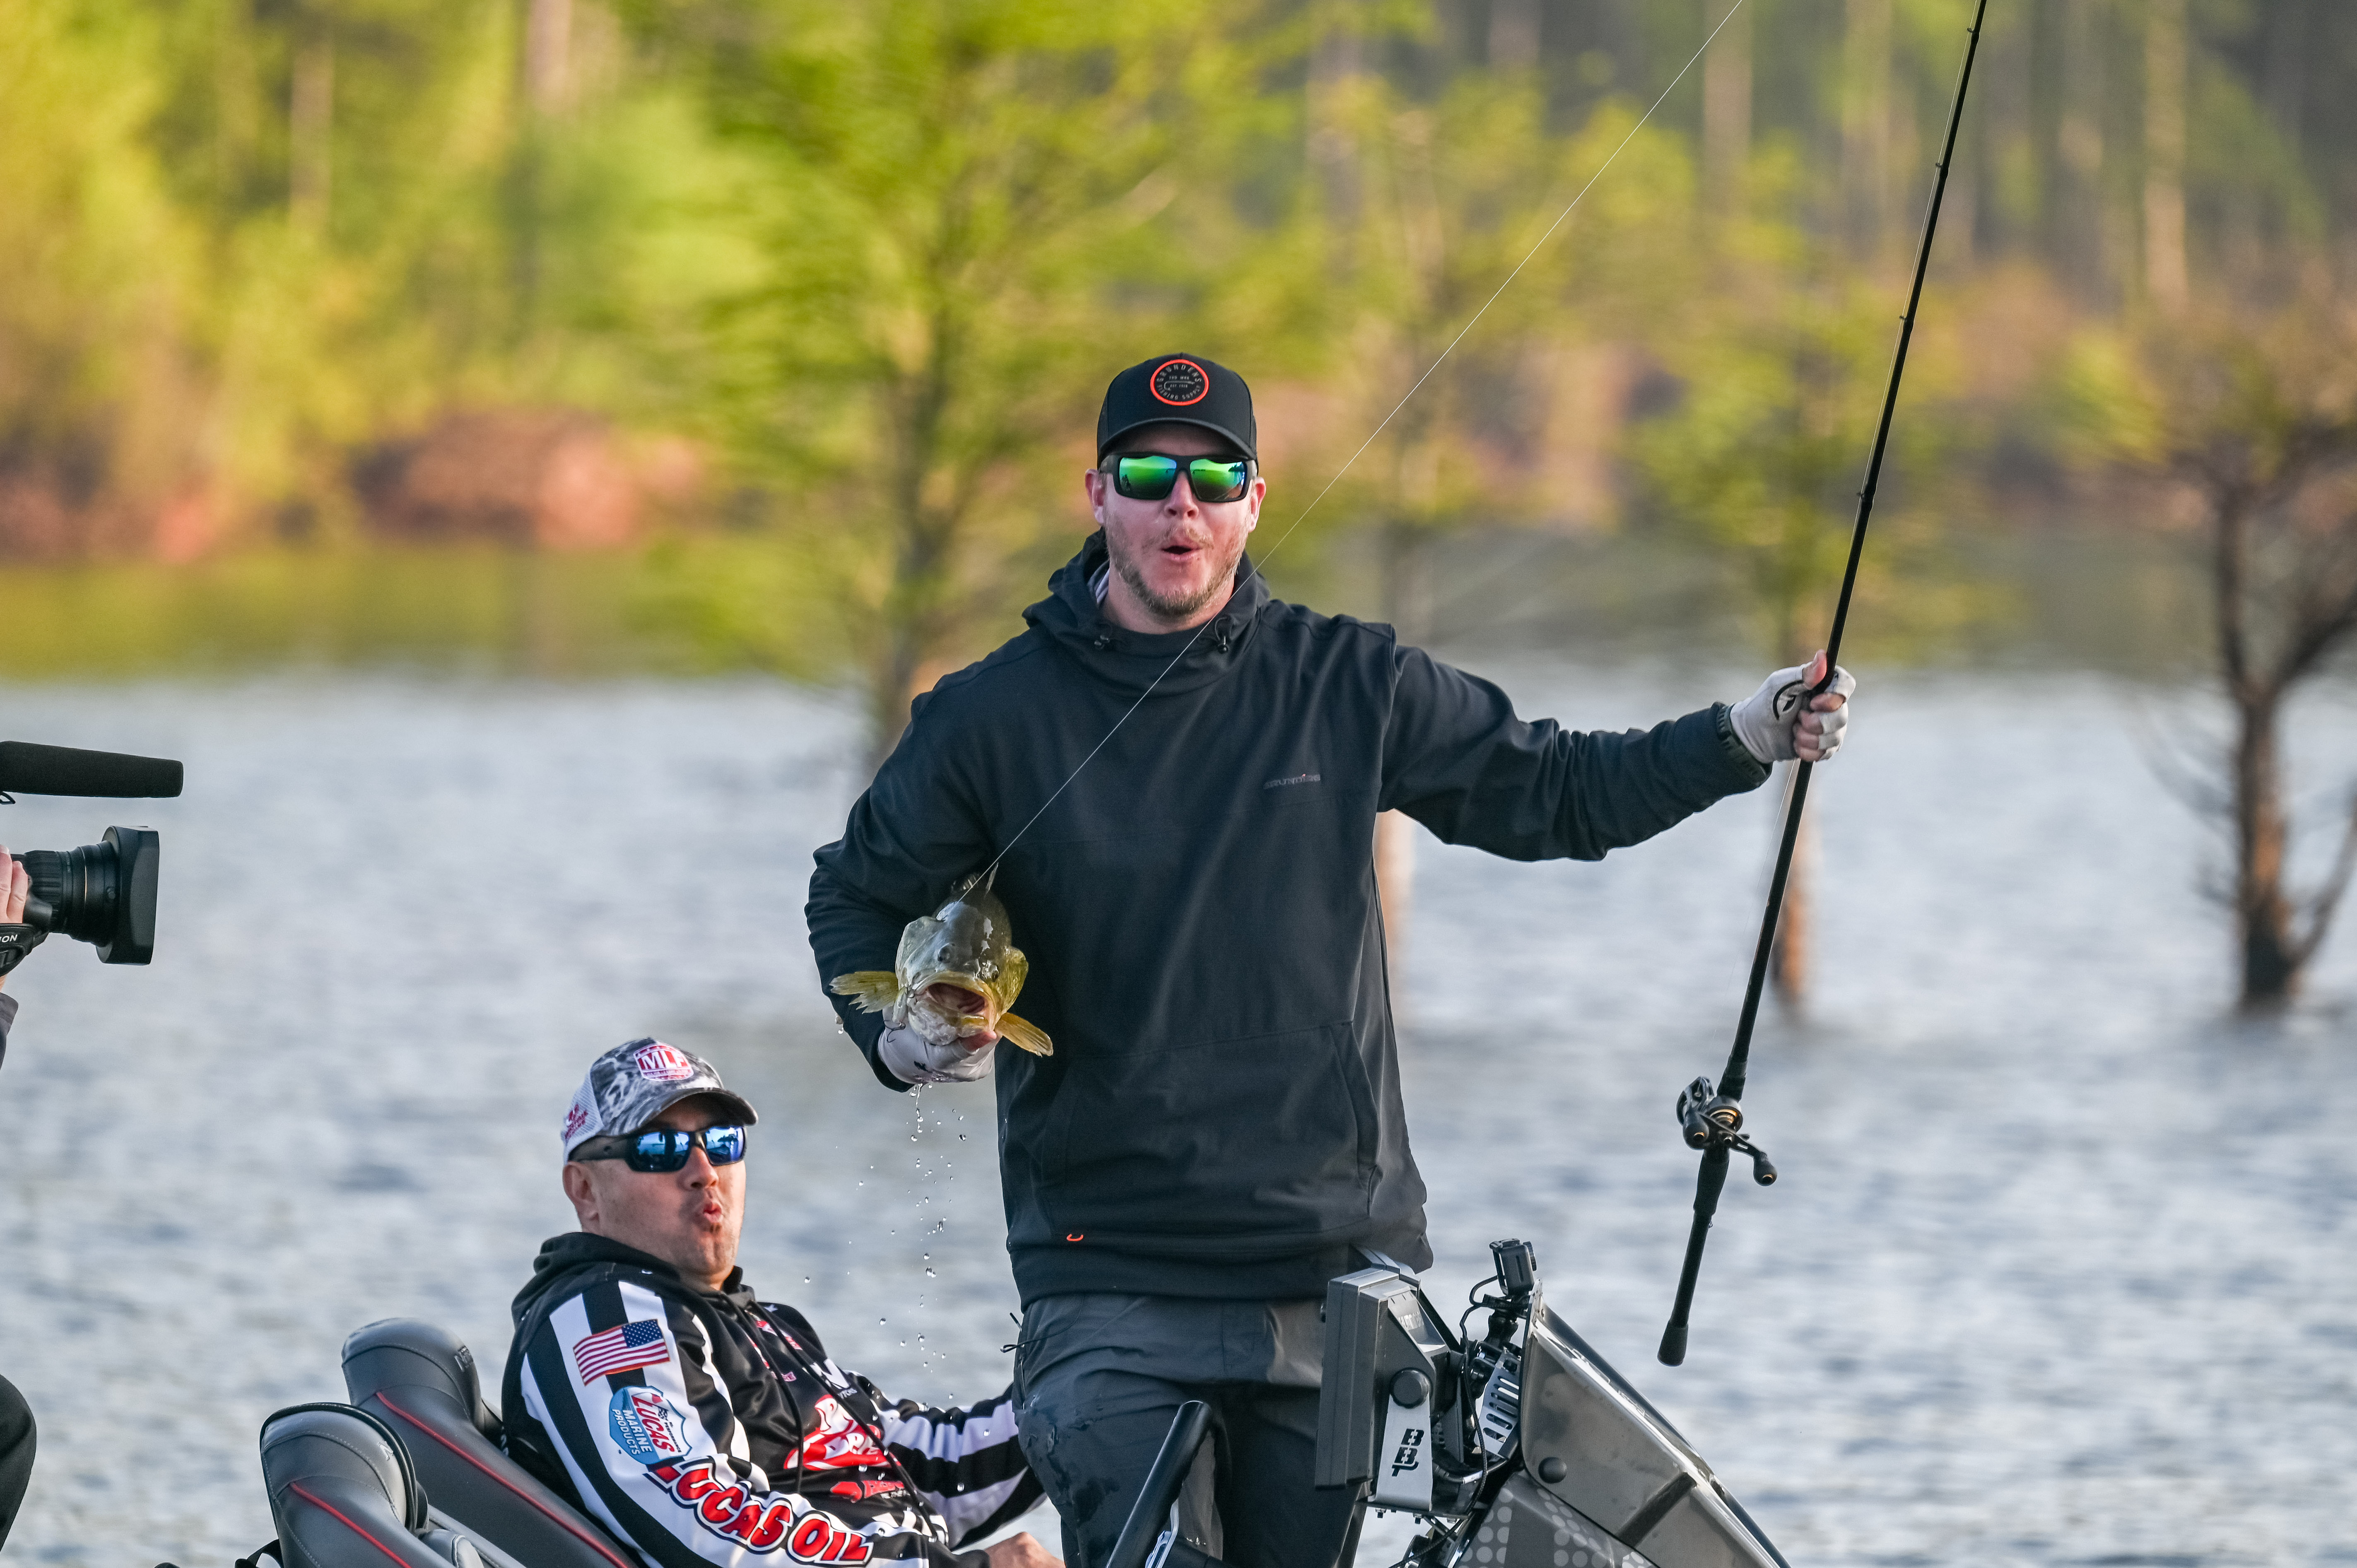 VanDam wins Group A Qualifying Round at Fox Rent A Car Stage Three on Lake  Murray Presented by Mercury - Major League Fishing